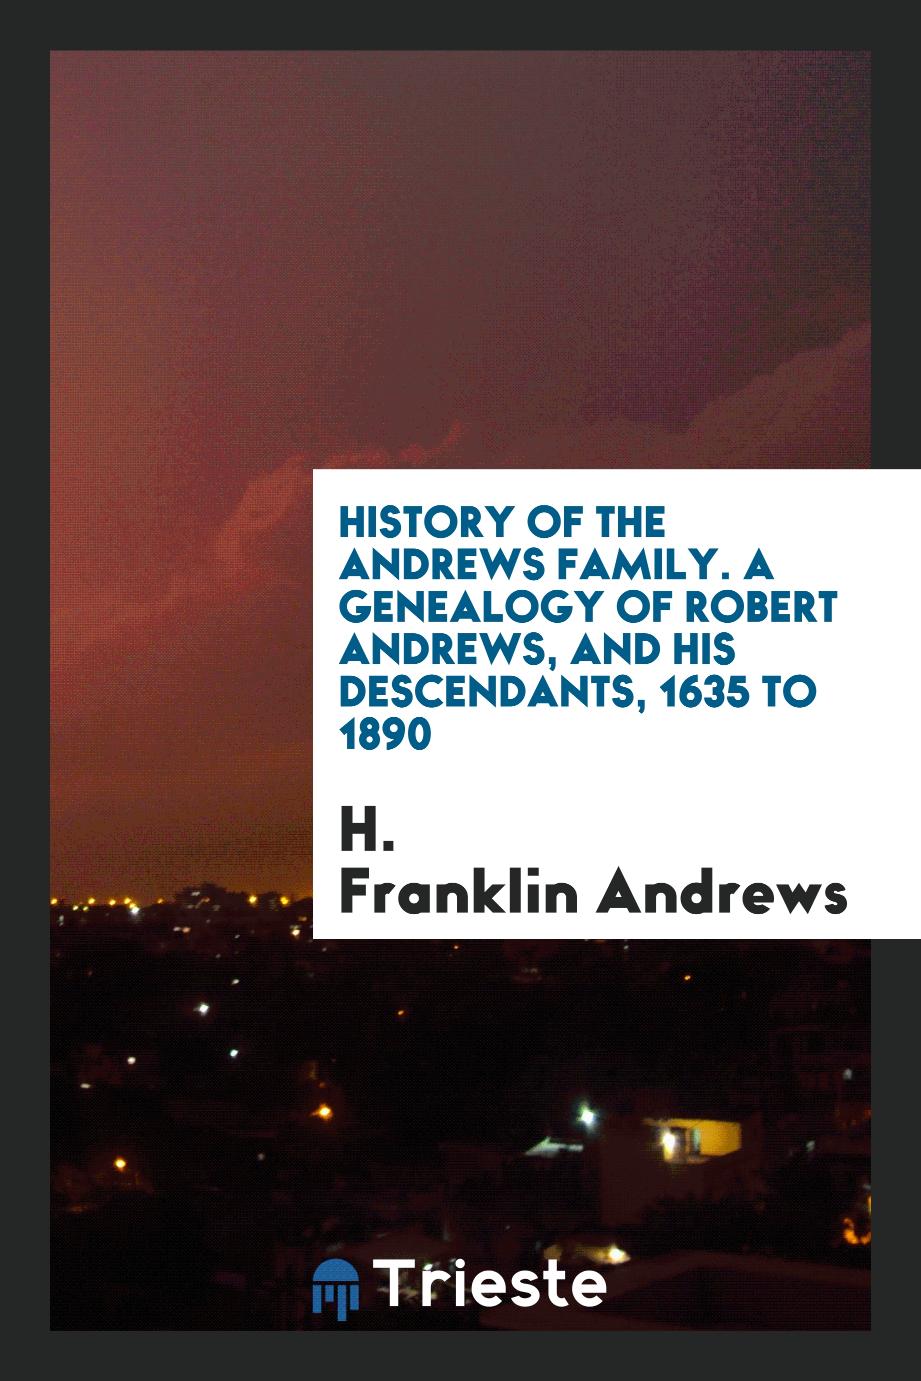 History of the Andrews family. A genealogy of Robert Andrews, and his descendants, 1635 to 1890